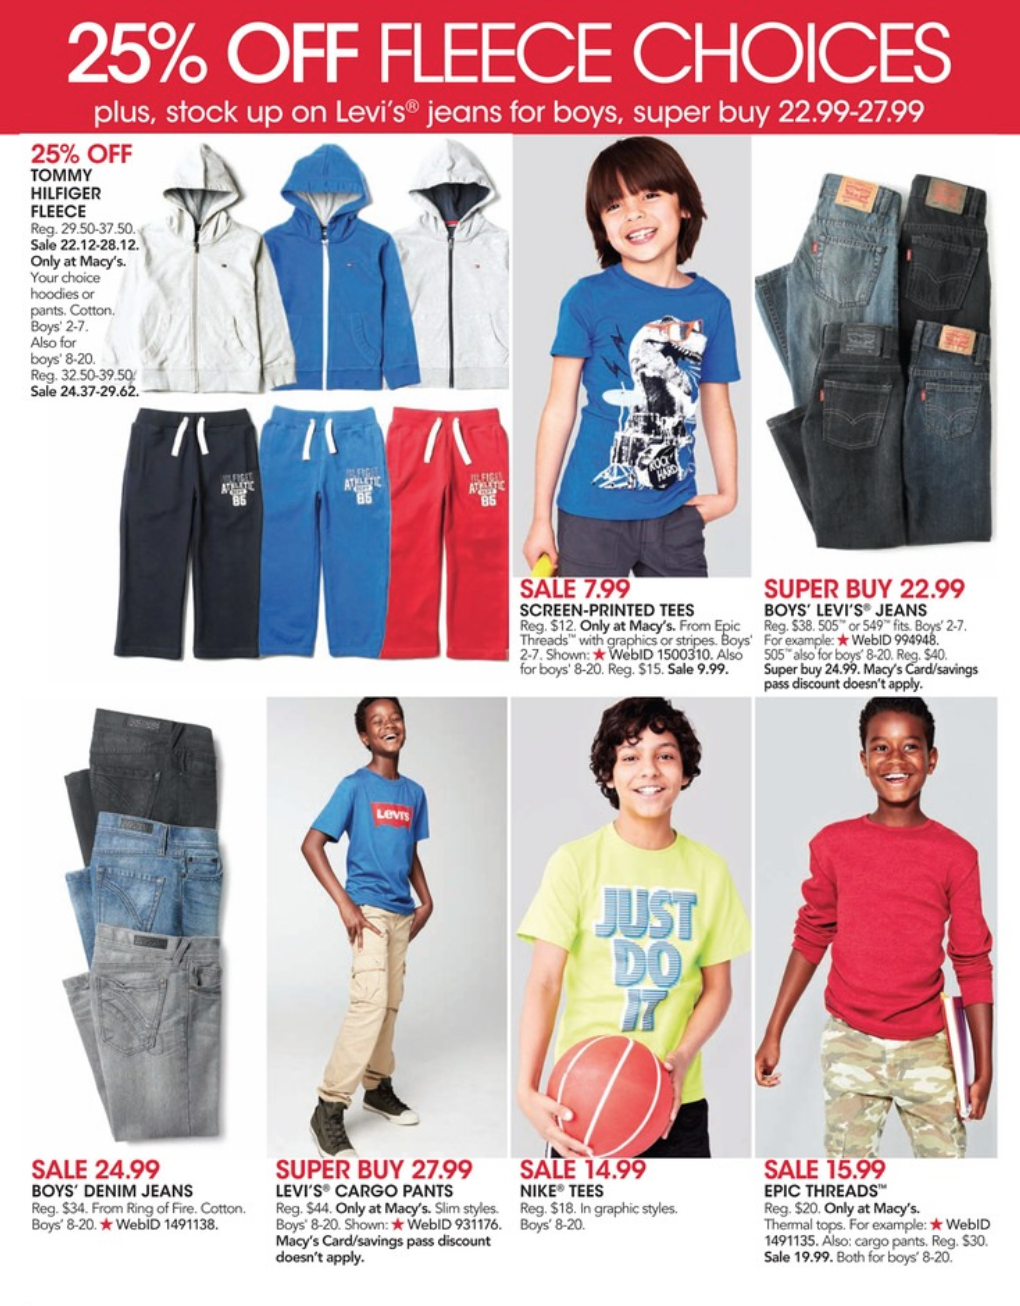 Macyâ€™s 2015 Labor Day Weekend Sale  Coupons for the Best Deals ...